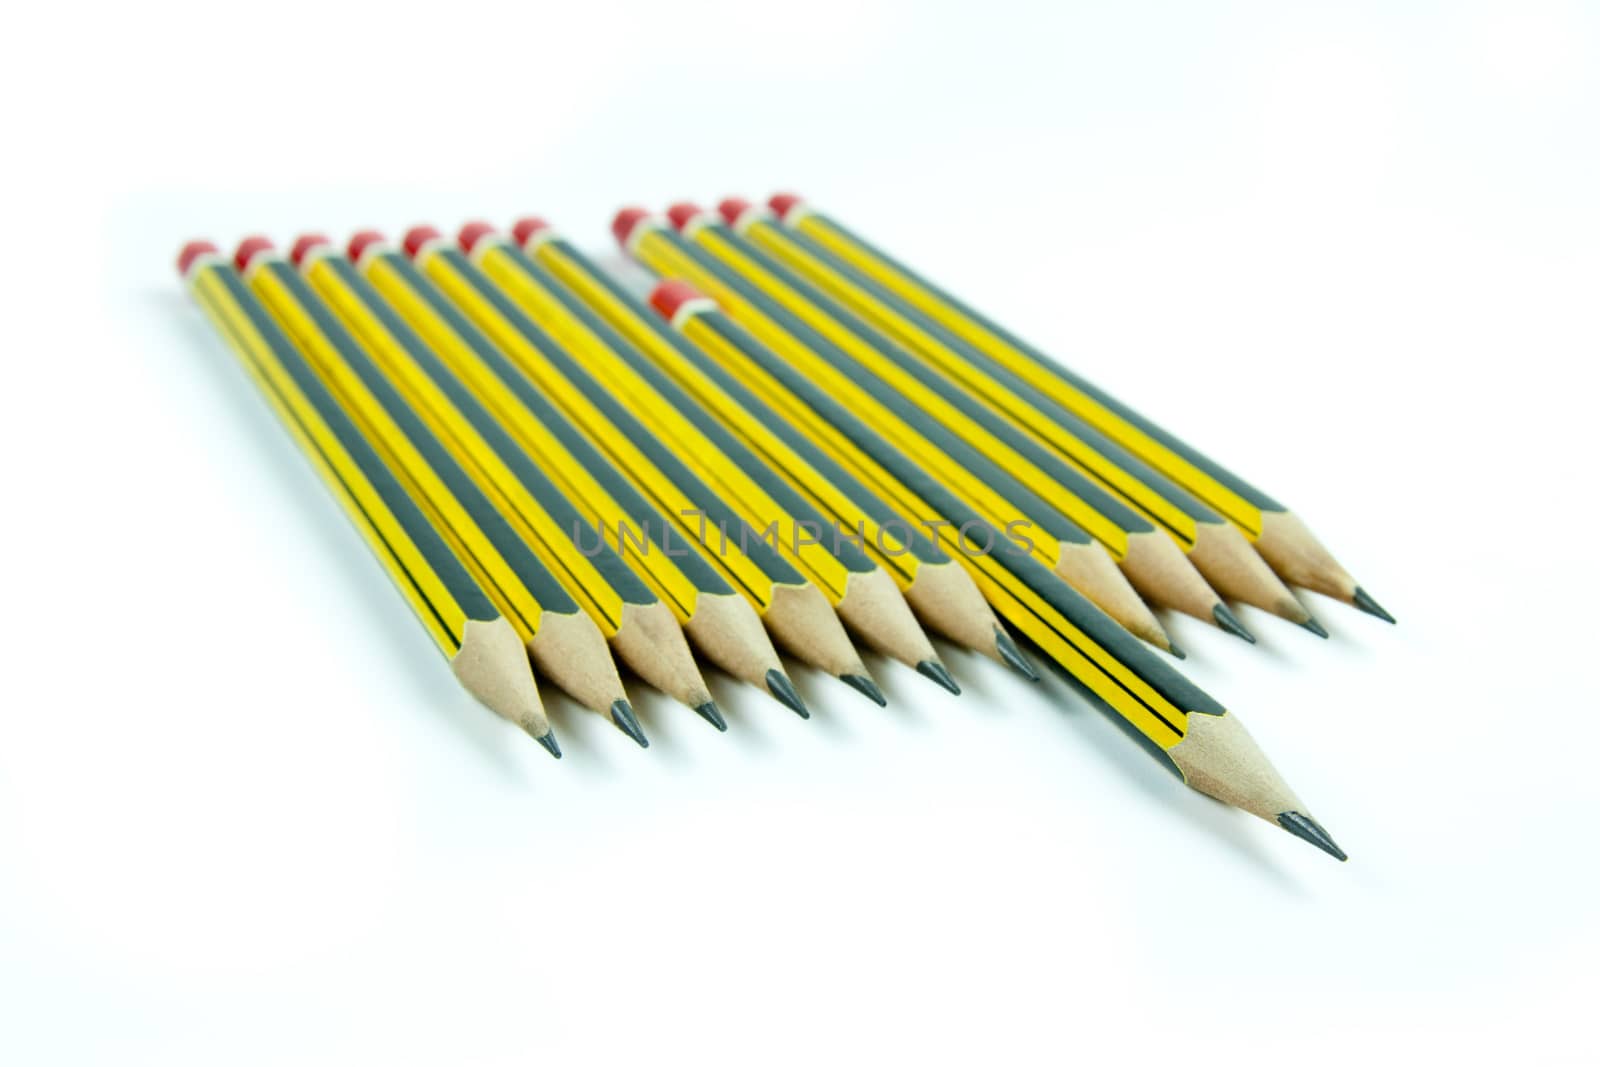 Sharp pencils with one standing out